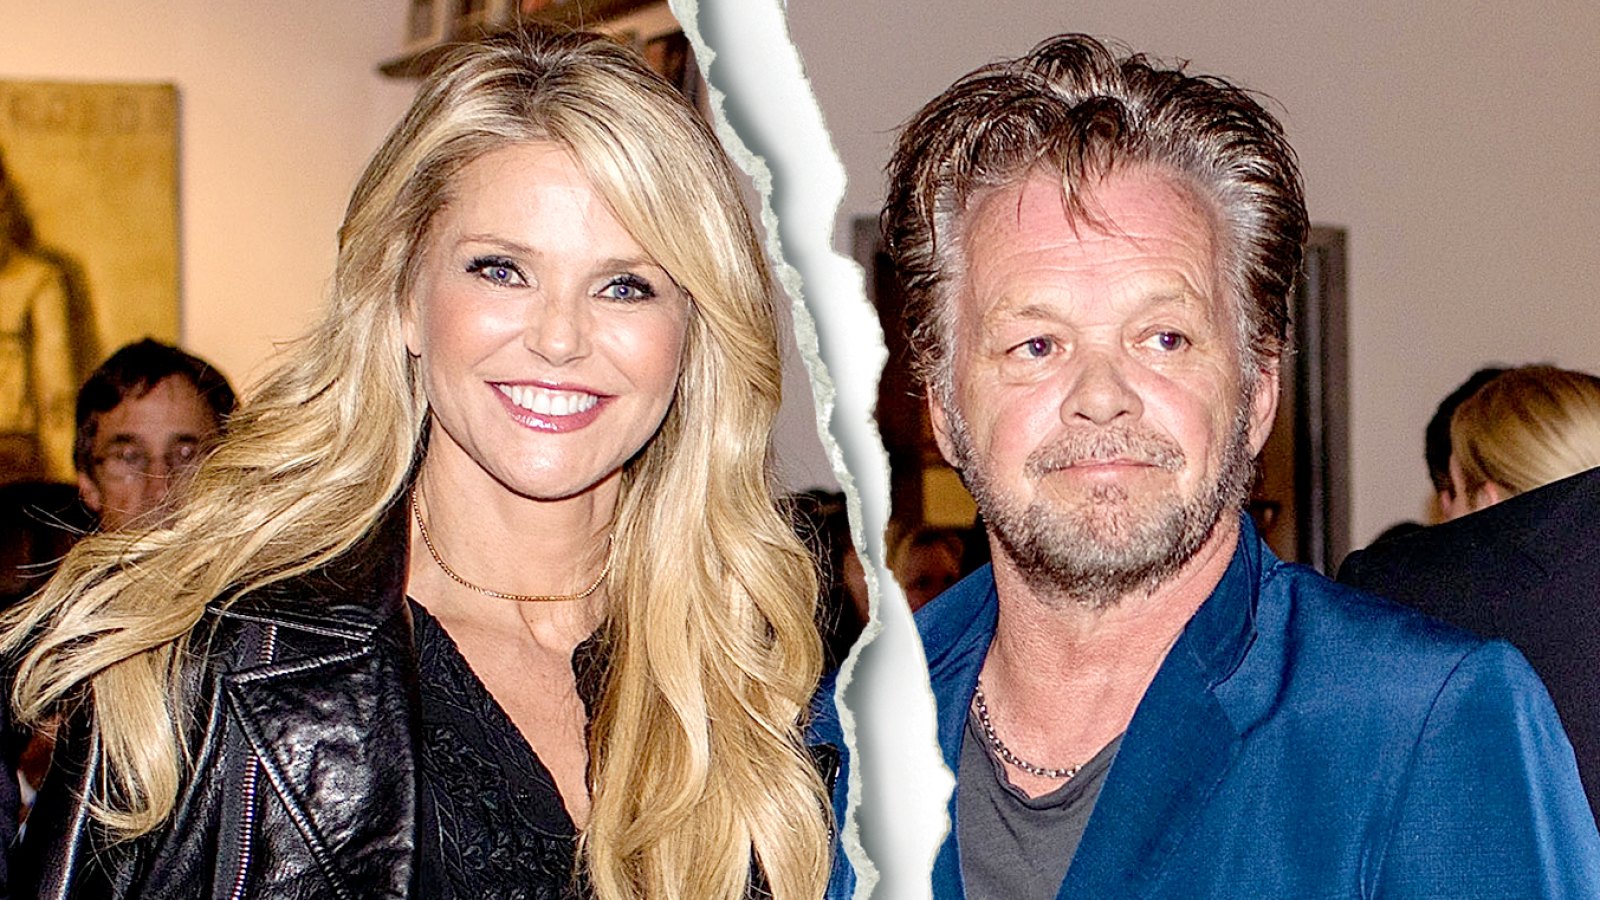 Christie Brinkley and John Mellencamp attend Mr. Mellencamp's "The Isolation Of Mister" art exibition opening at the ACA Galleries on October 21, 2015 in New York City.